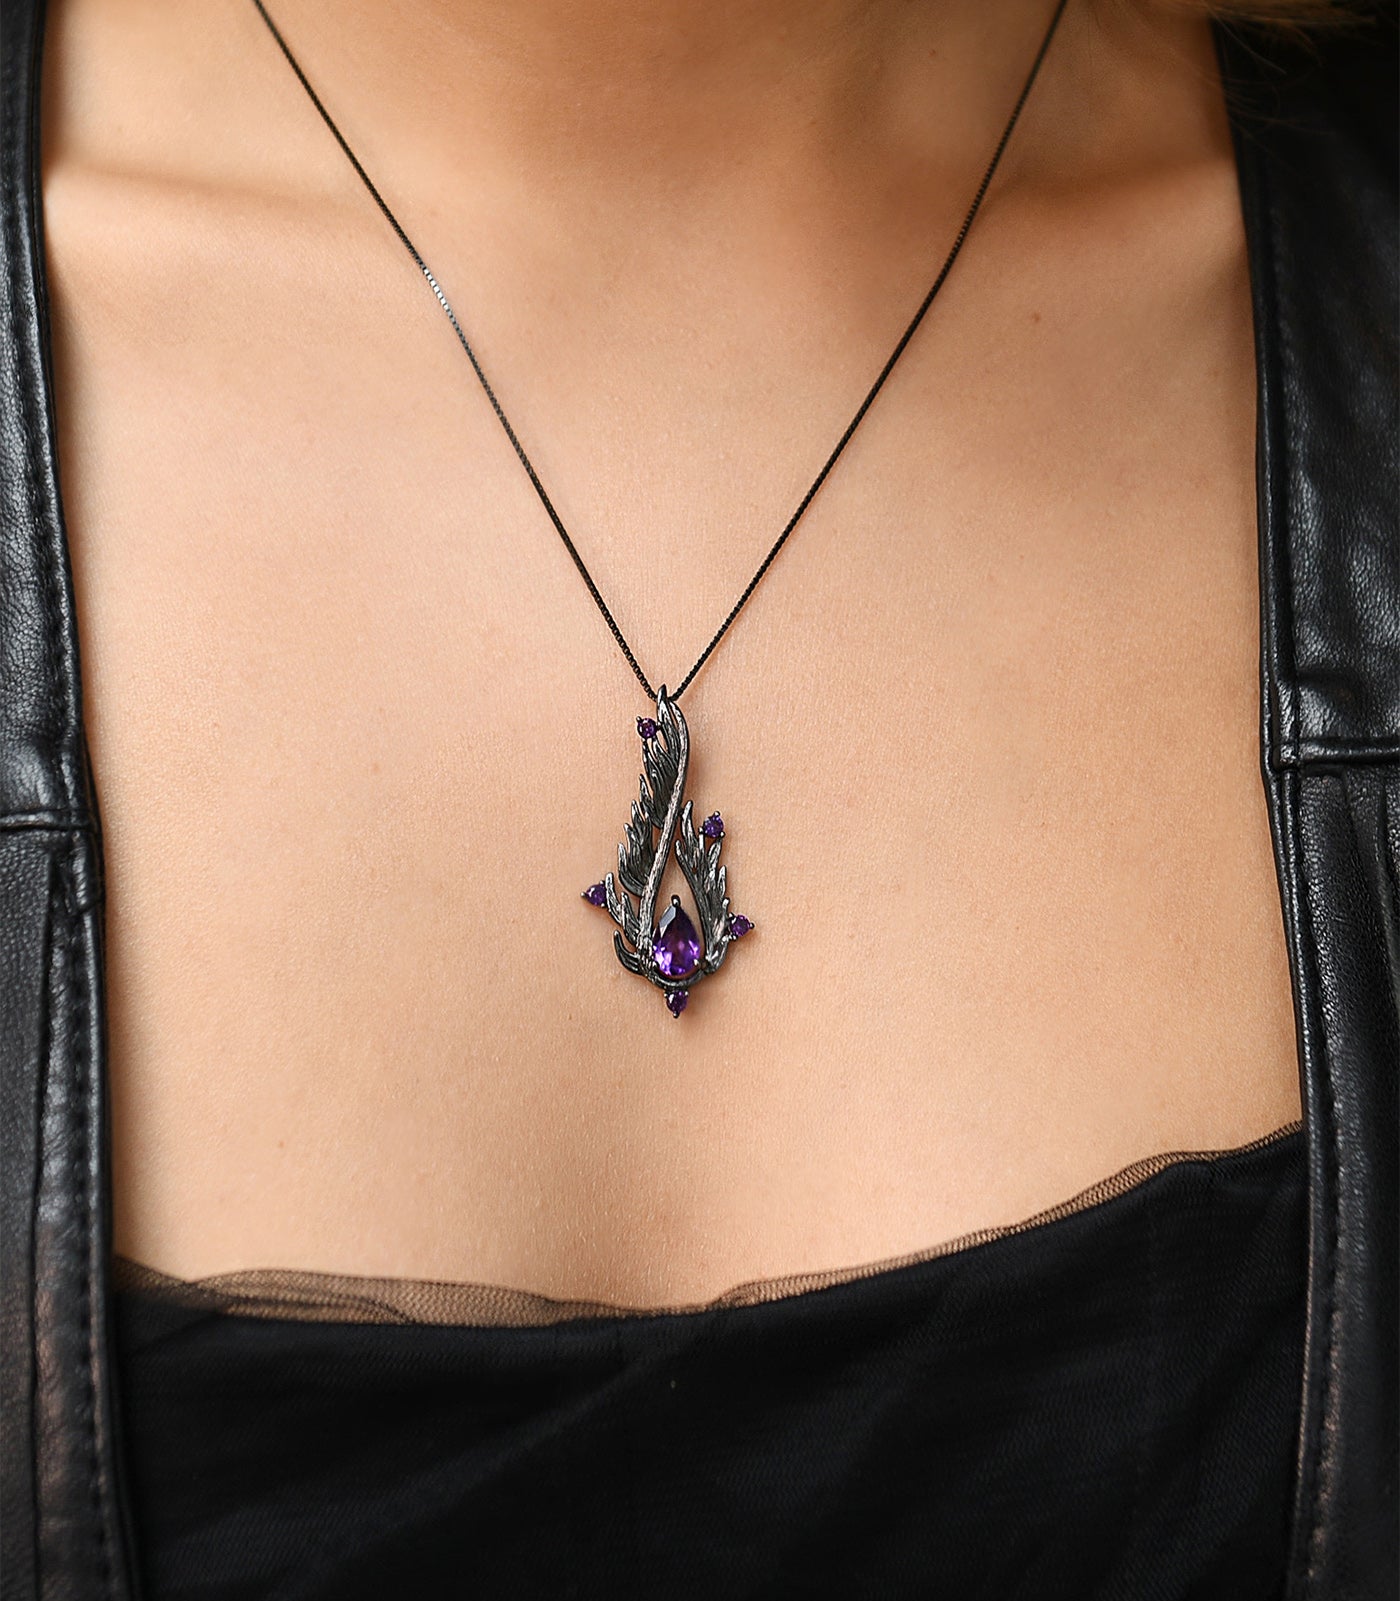 An oxidised sterling silver necklace with a teardrop shaped pendant. The necklace has purple amethyst stones.